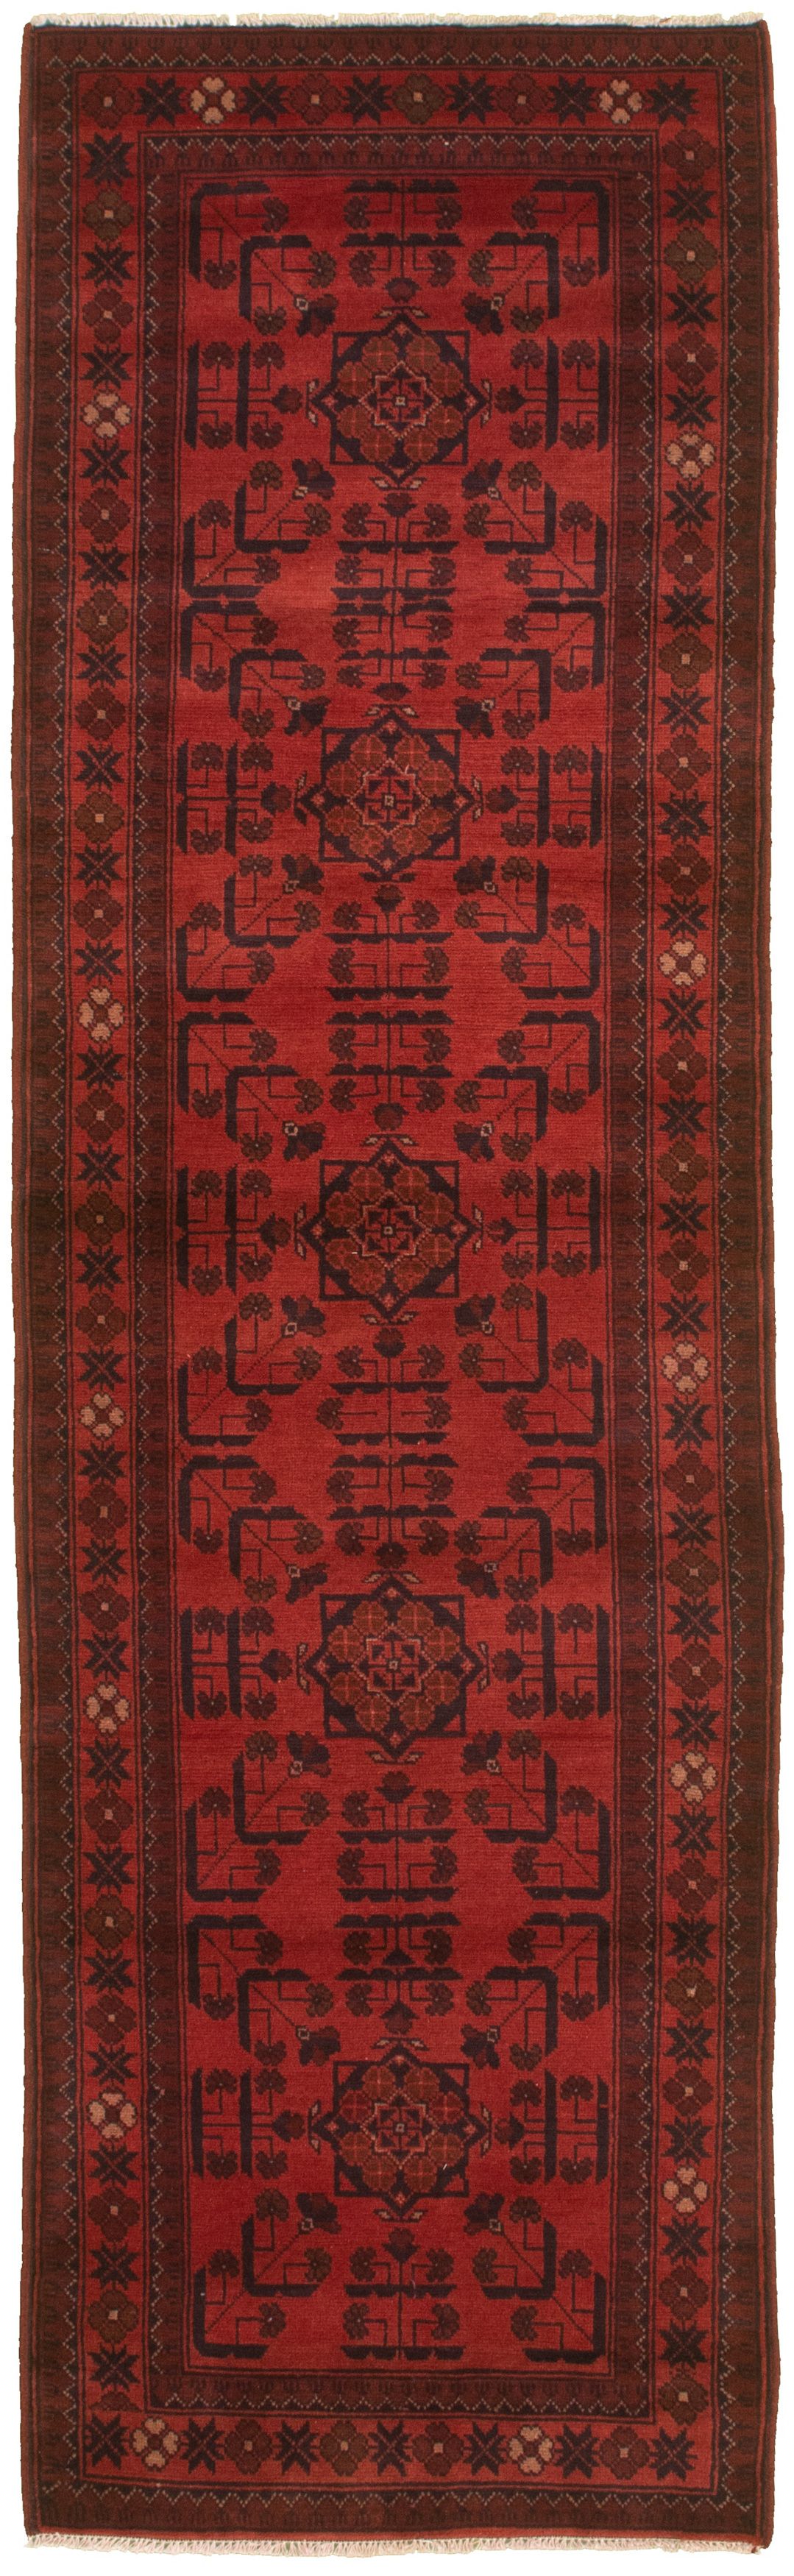 Hand-knotted Finest Khal Mohammadi Red  Rug 2'9" x 9'5"  Size: 2'9" x 9'5"  